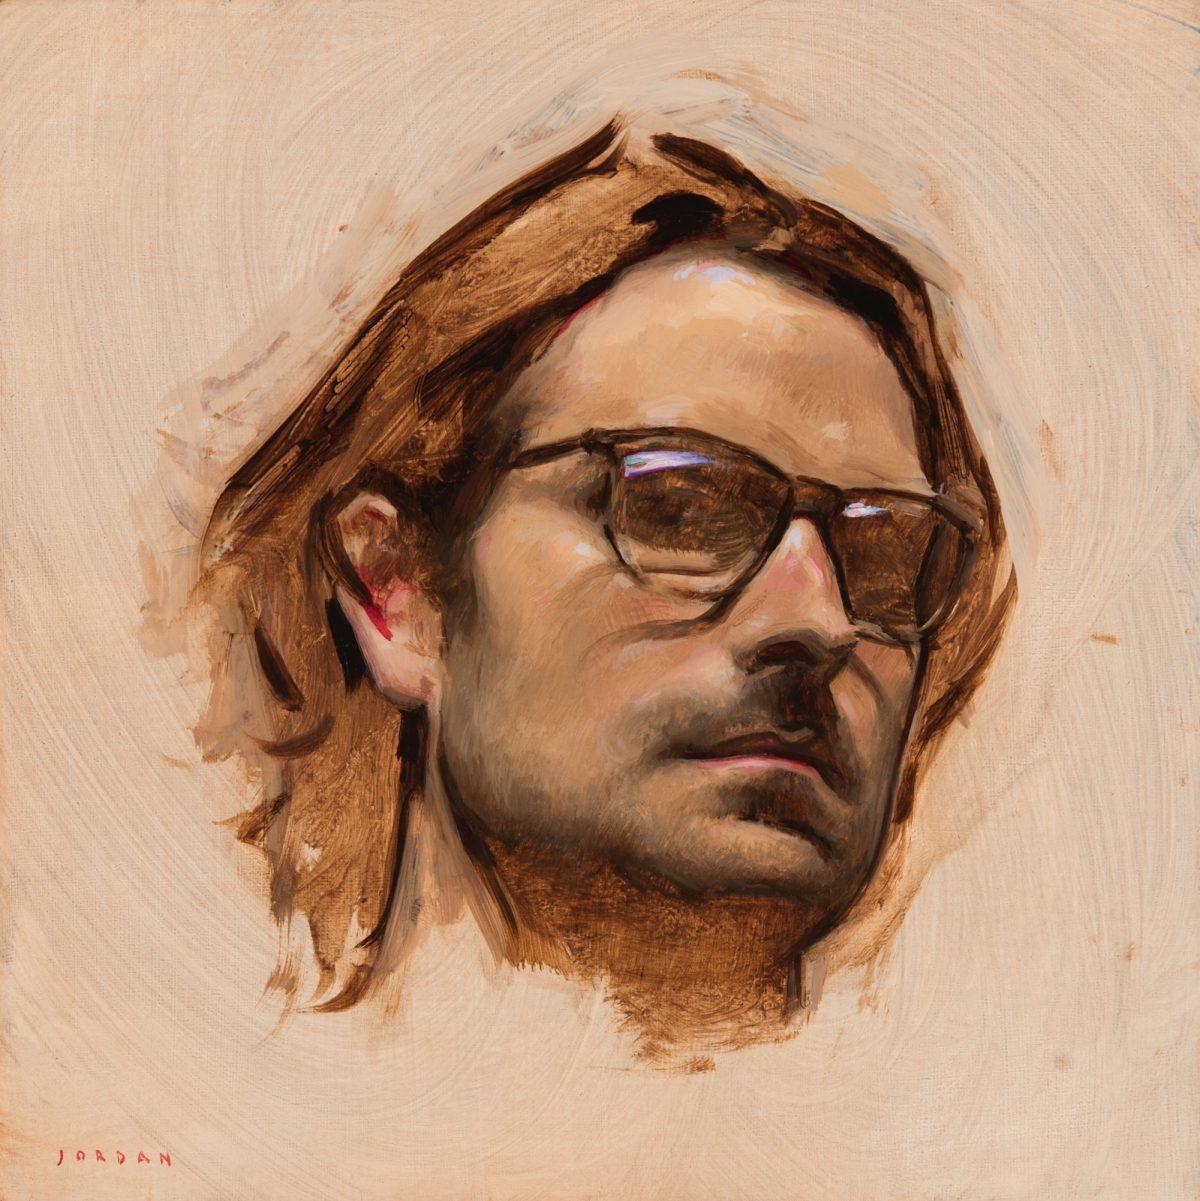 "Self Portrait with Glasses," 2017, by Jordan Sokol. Oil on panel, 8 inches by 8 inches. (Courtesy of Jordan Sokol)